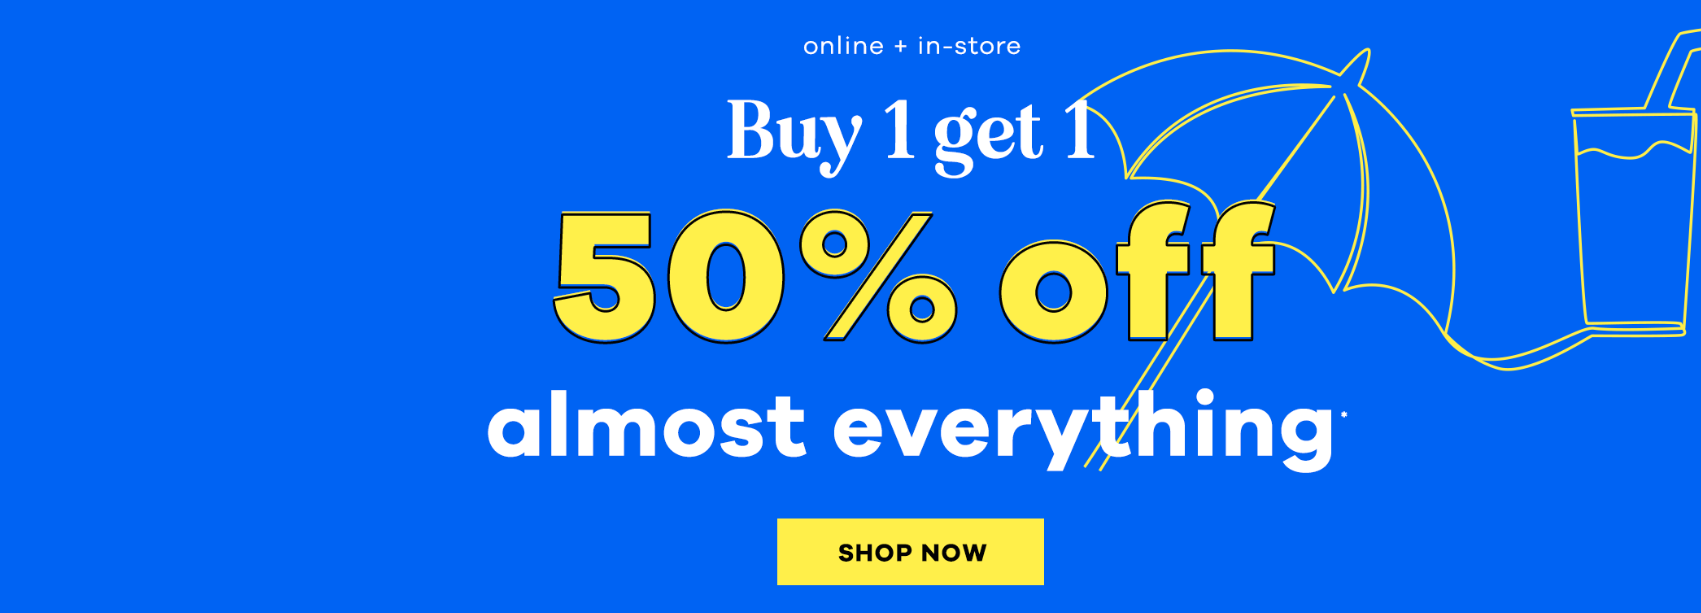 Shoes & Sox - Buy 1 get 1 50% OFF almost everything, Free shipping $69+